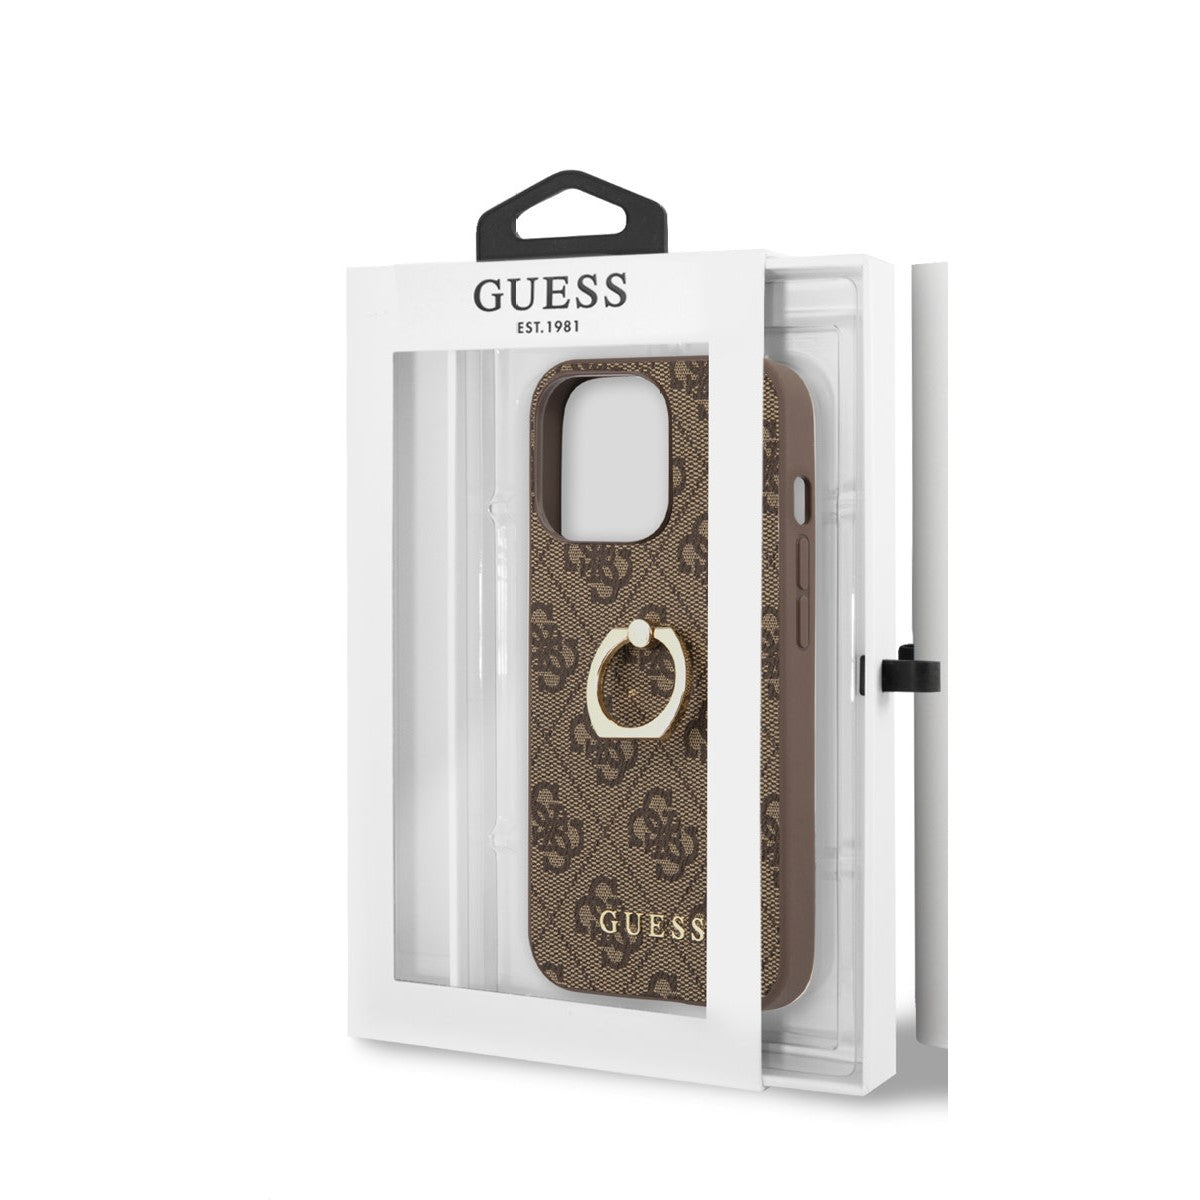 Guess iPhone 14 Pro Max Backcover - Met Ringhouder - Bruin